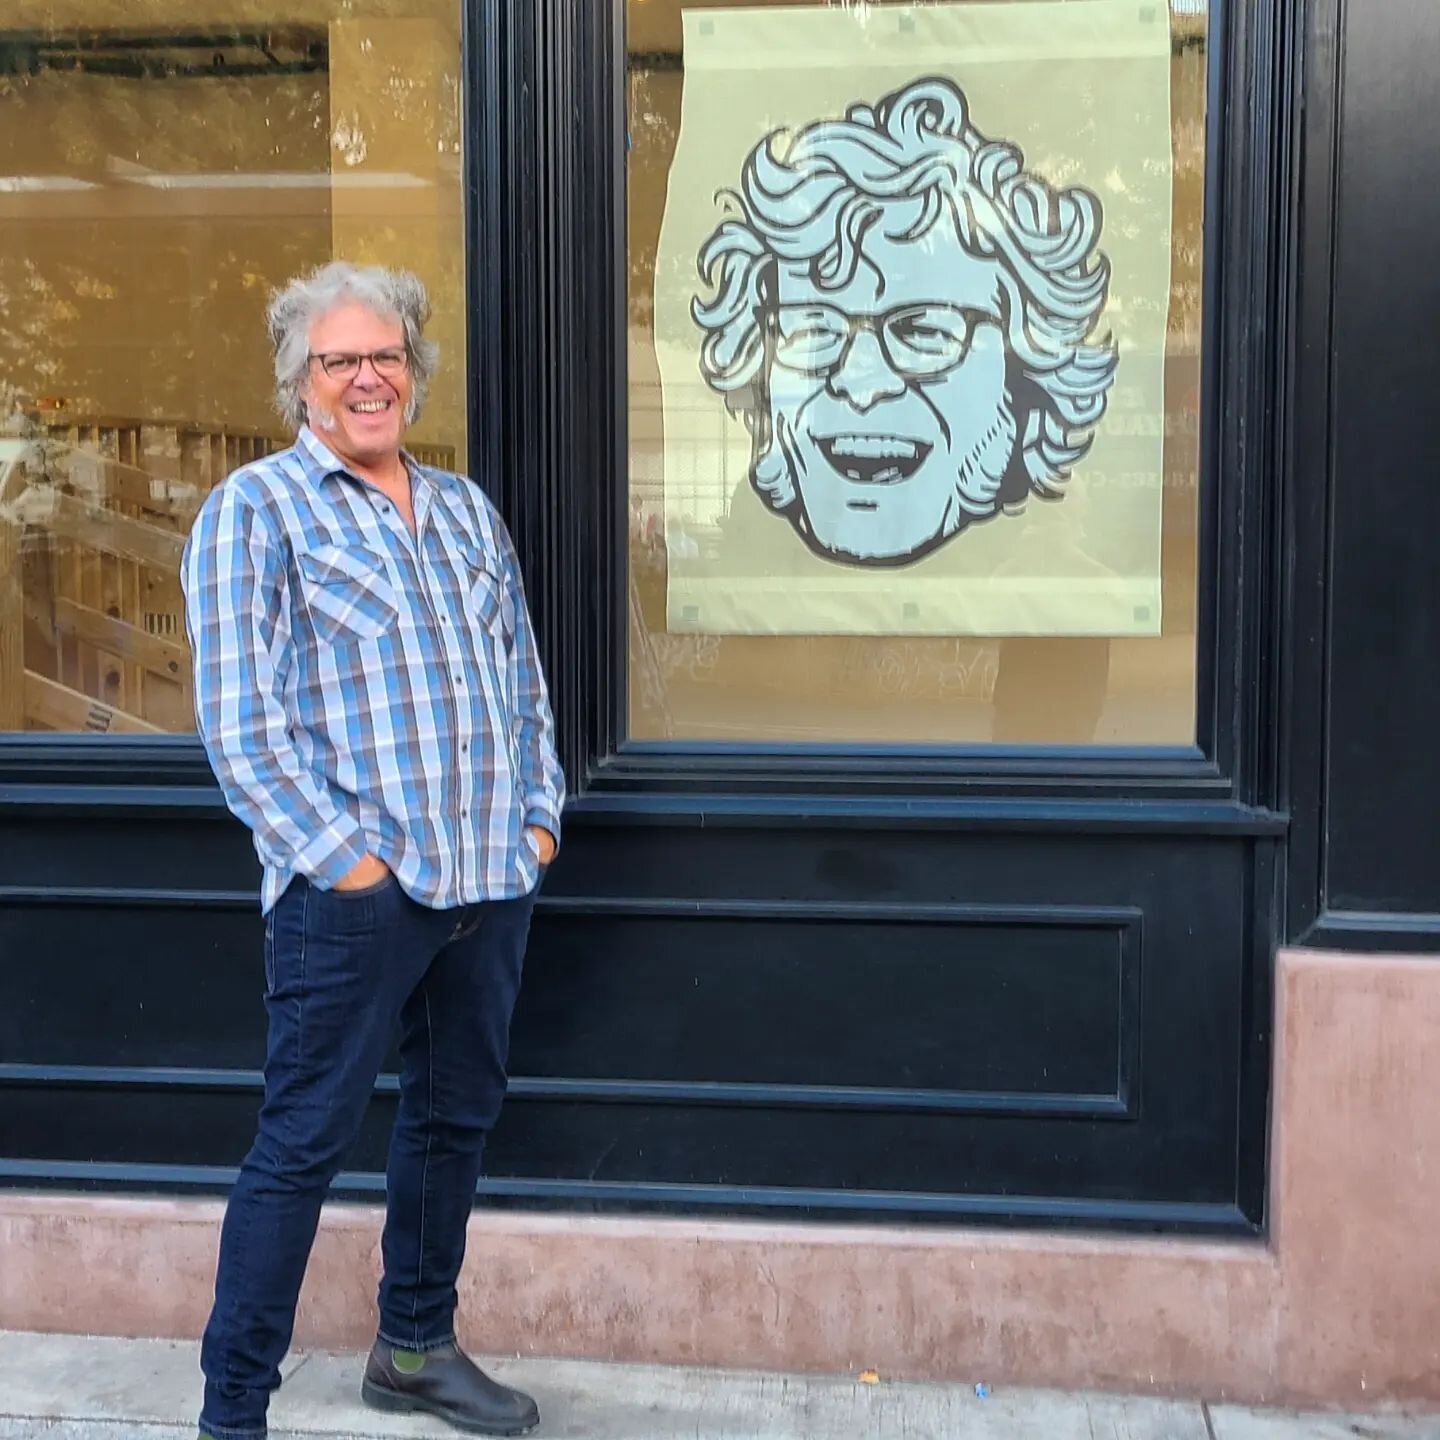 Yep, it's official...I'm FINALLY opening the burger joint of my dreams! After an exhausting 3-year search for the perfect location we have landed a sweet space in SoHo at 51 MacDougal St. It will be called Hamburger America, an extension of my books 